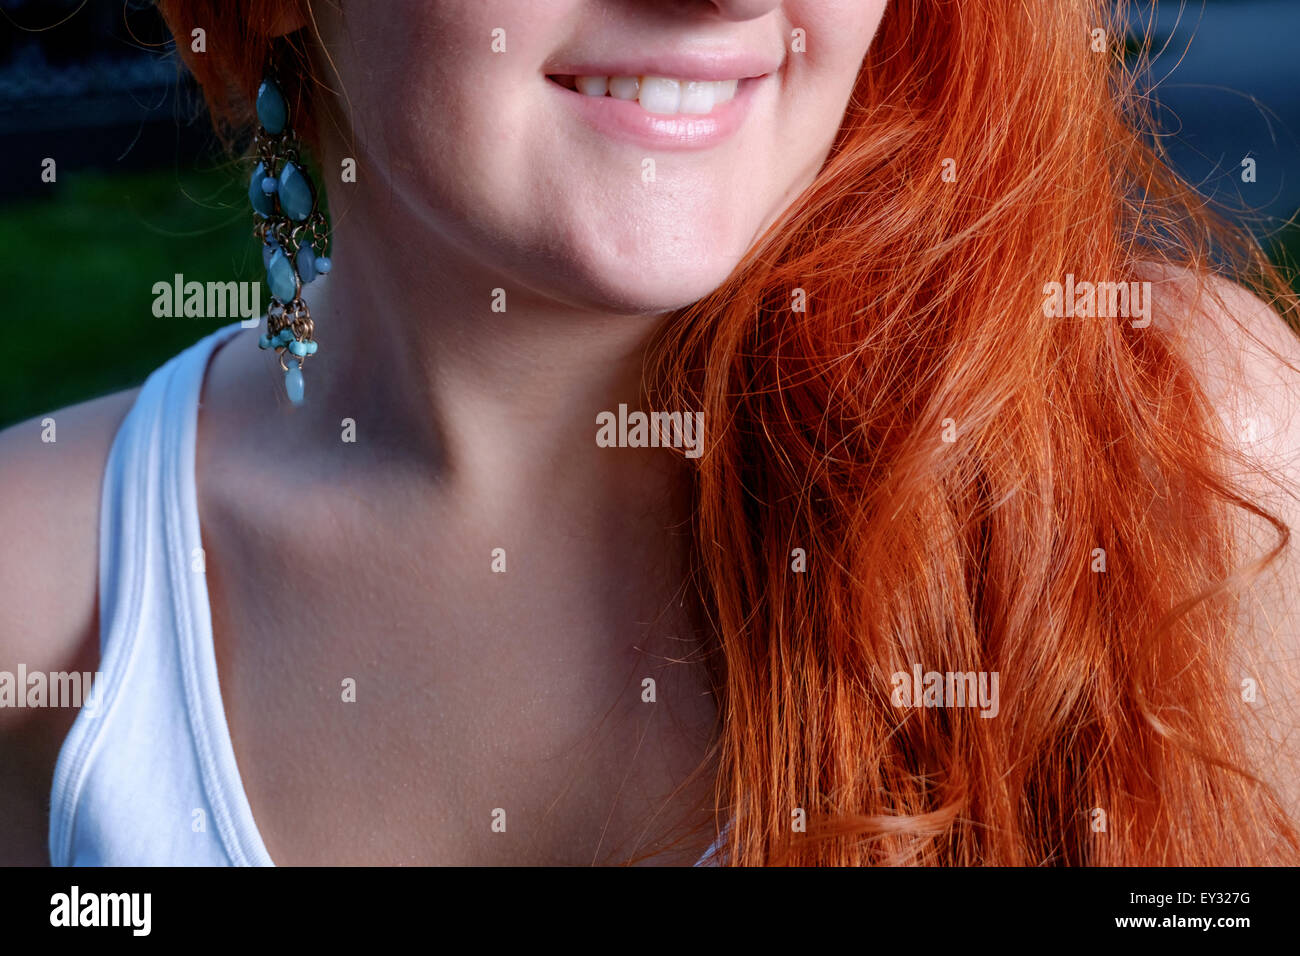 Red haired women smiling. Part of the face, closeup lips Stock Photo